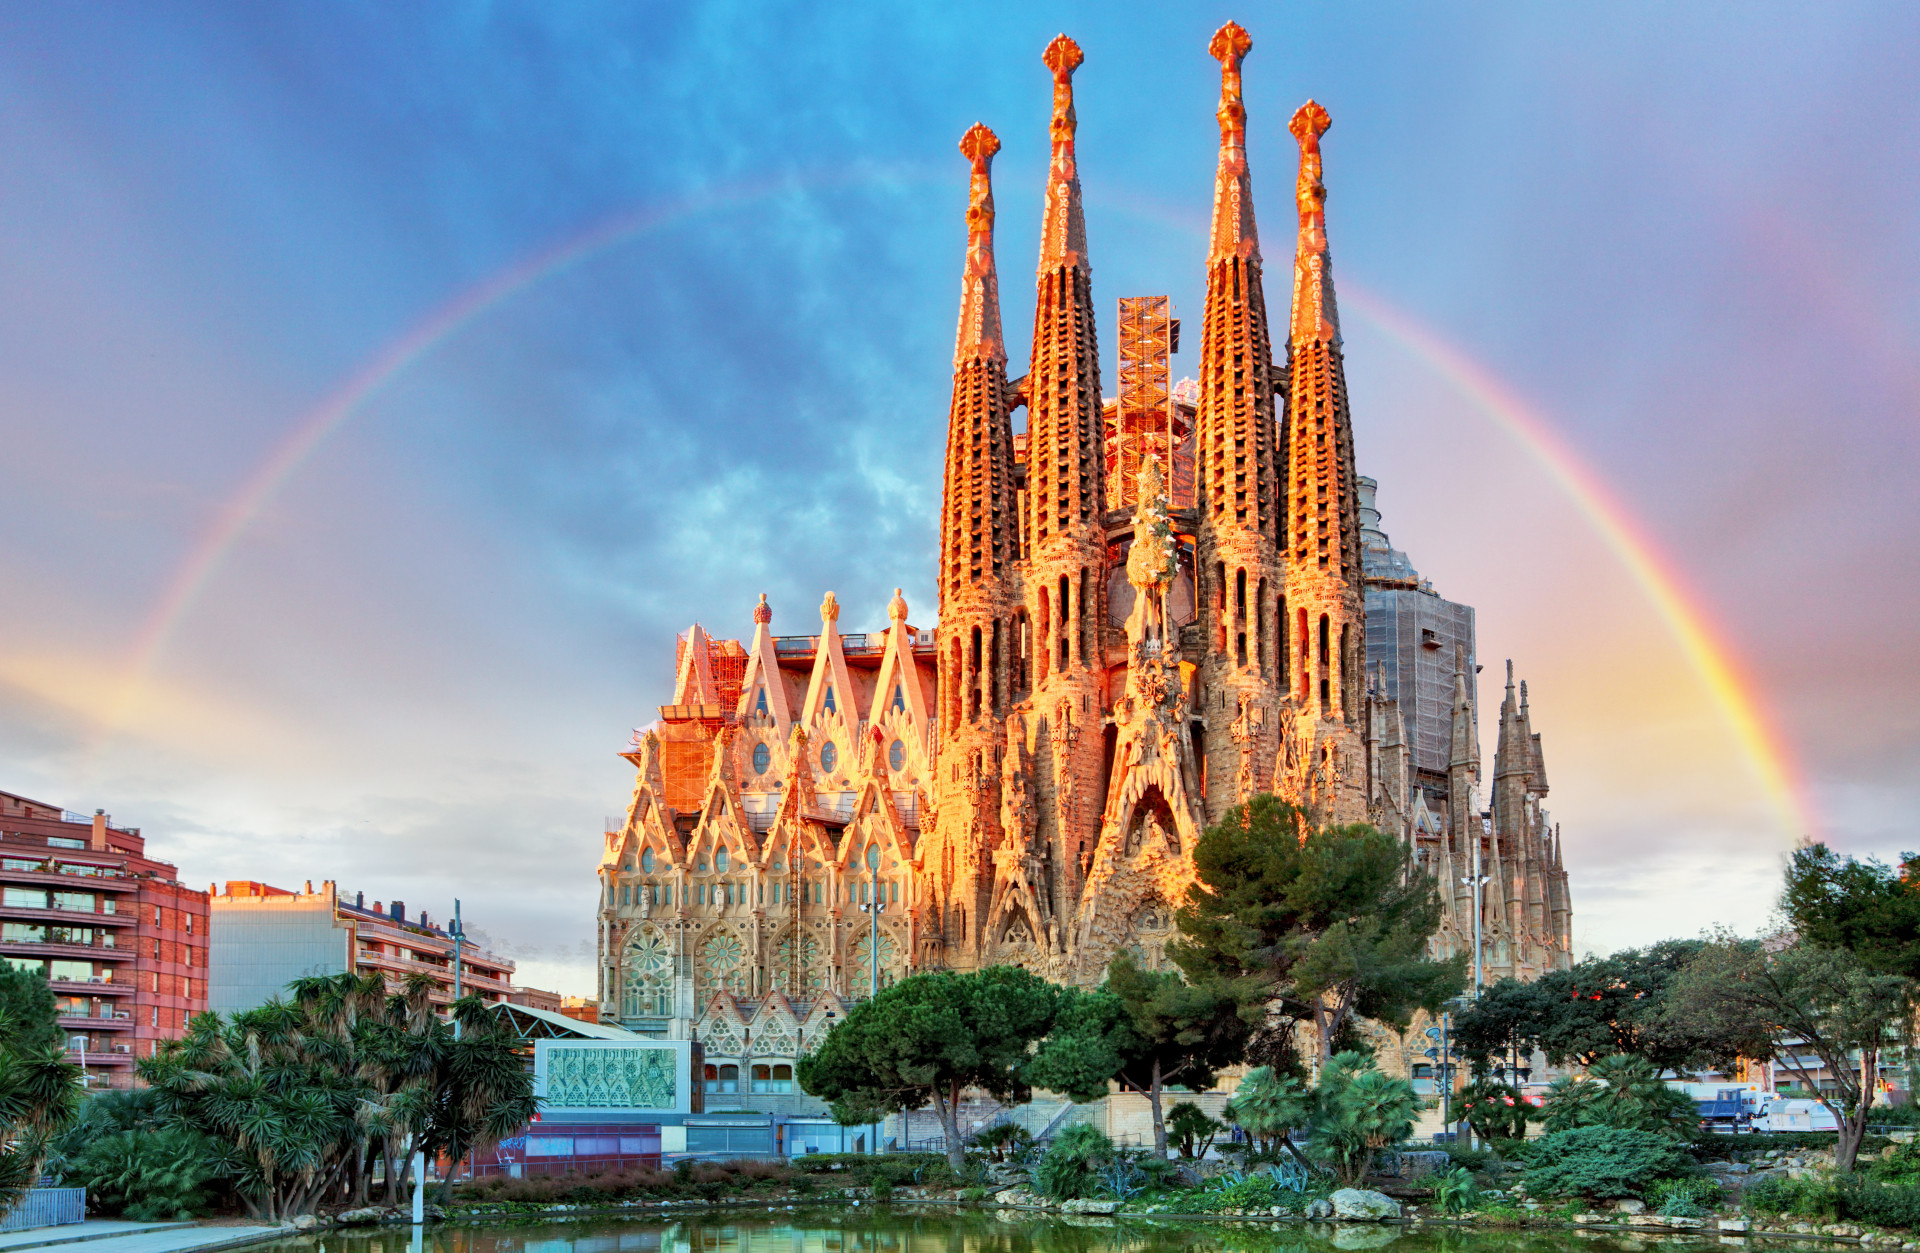 Barcelona's good accessibility legacy has lasted ever since the city hosted the 1992 Olympic Games.<p><a href="https://www.msn.com/en-us/community/channel/vid-7xx8mnucu55yw63we9va2gwr7uihbxwc68fxqp25x6tg4ftibpra?cvid=94631541bc0f4f89bfd59158d696ad7e">Follow us and access great exclusive content every day</a></p>